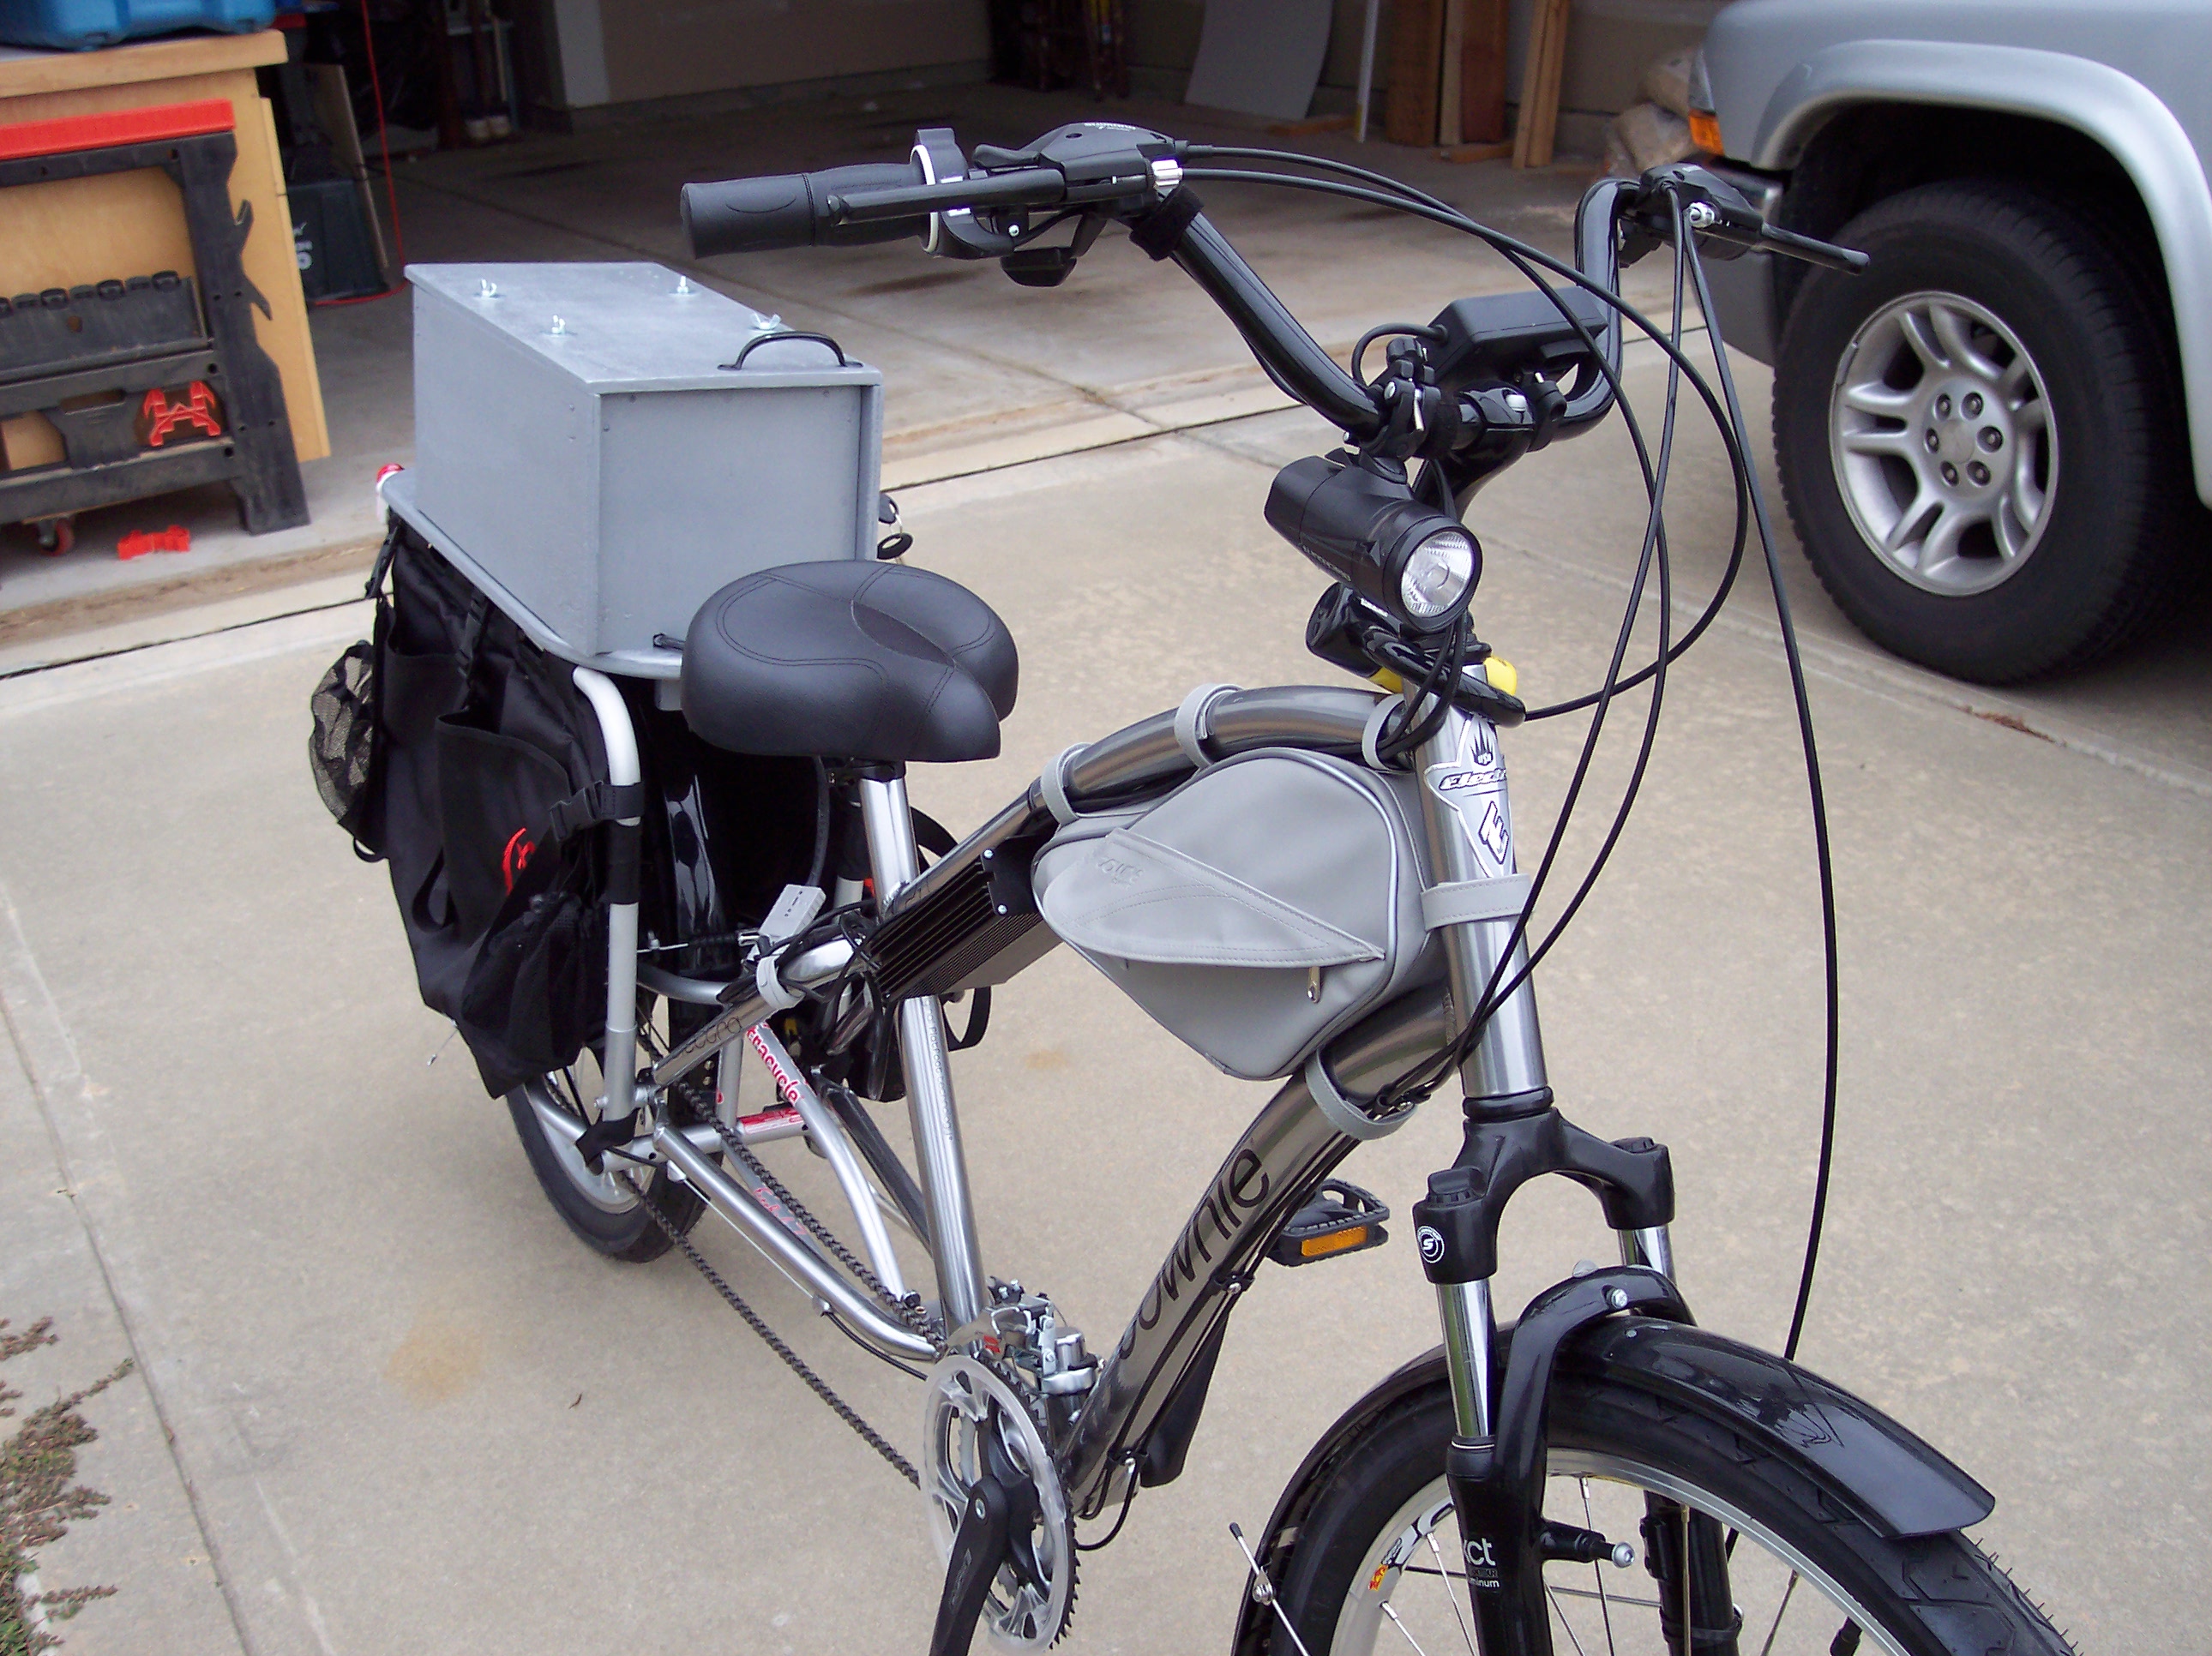 First iteration XtraCycle and lead battery